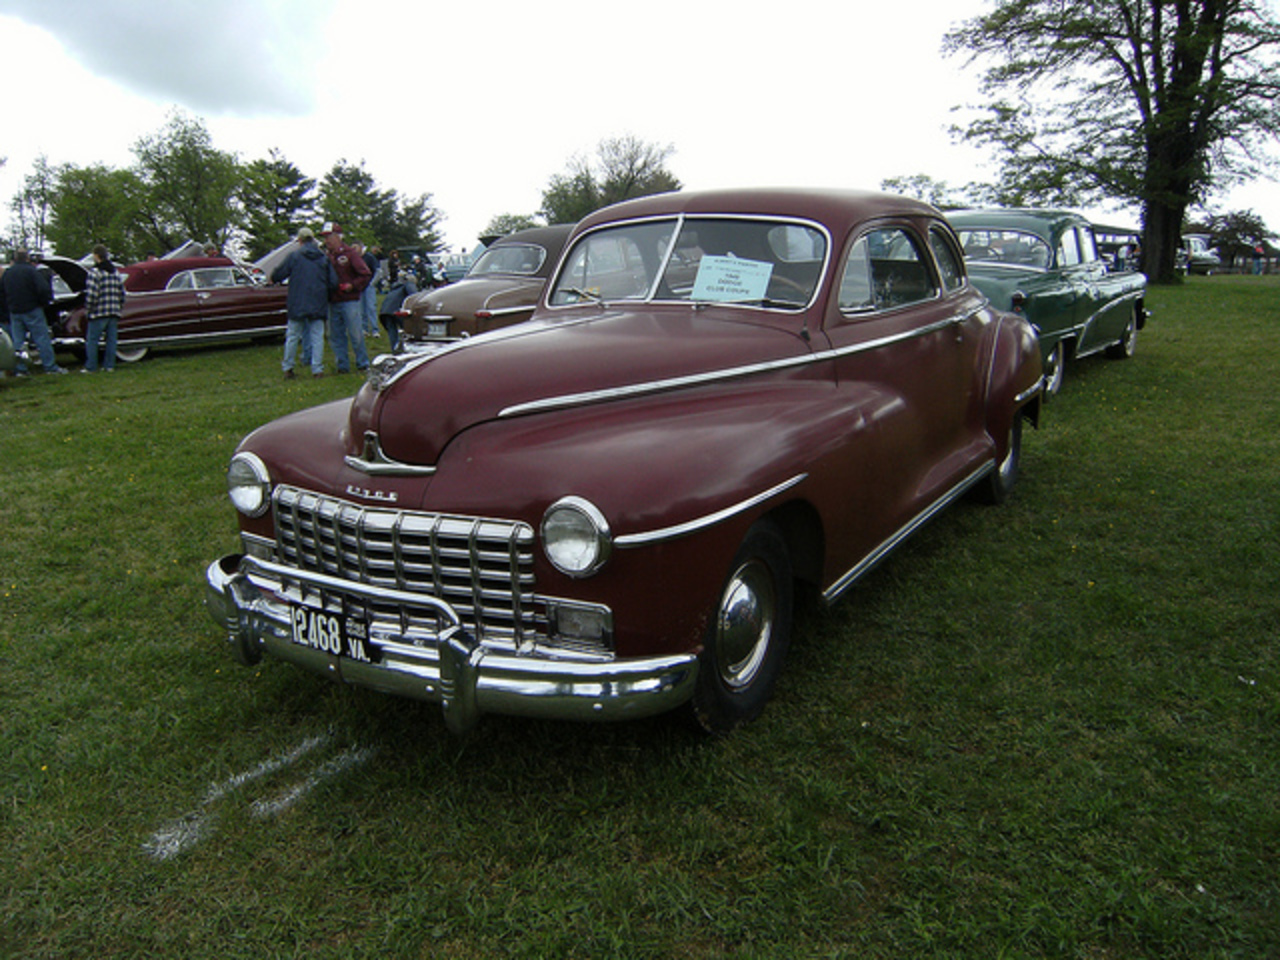 48 Dodge Club Coupe | Flickr - Photo Sharing!